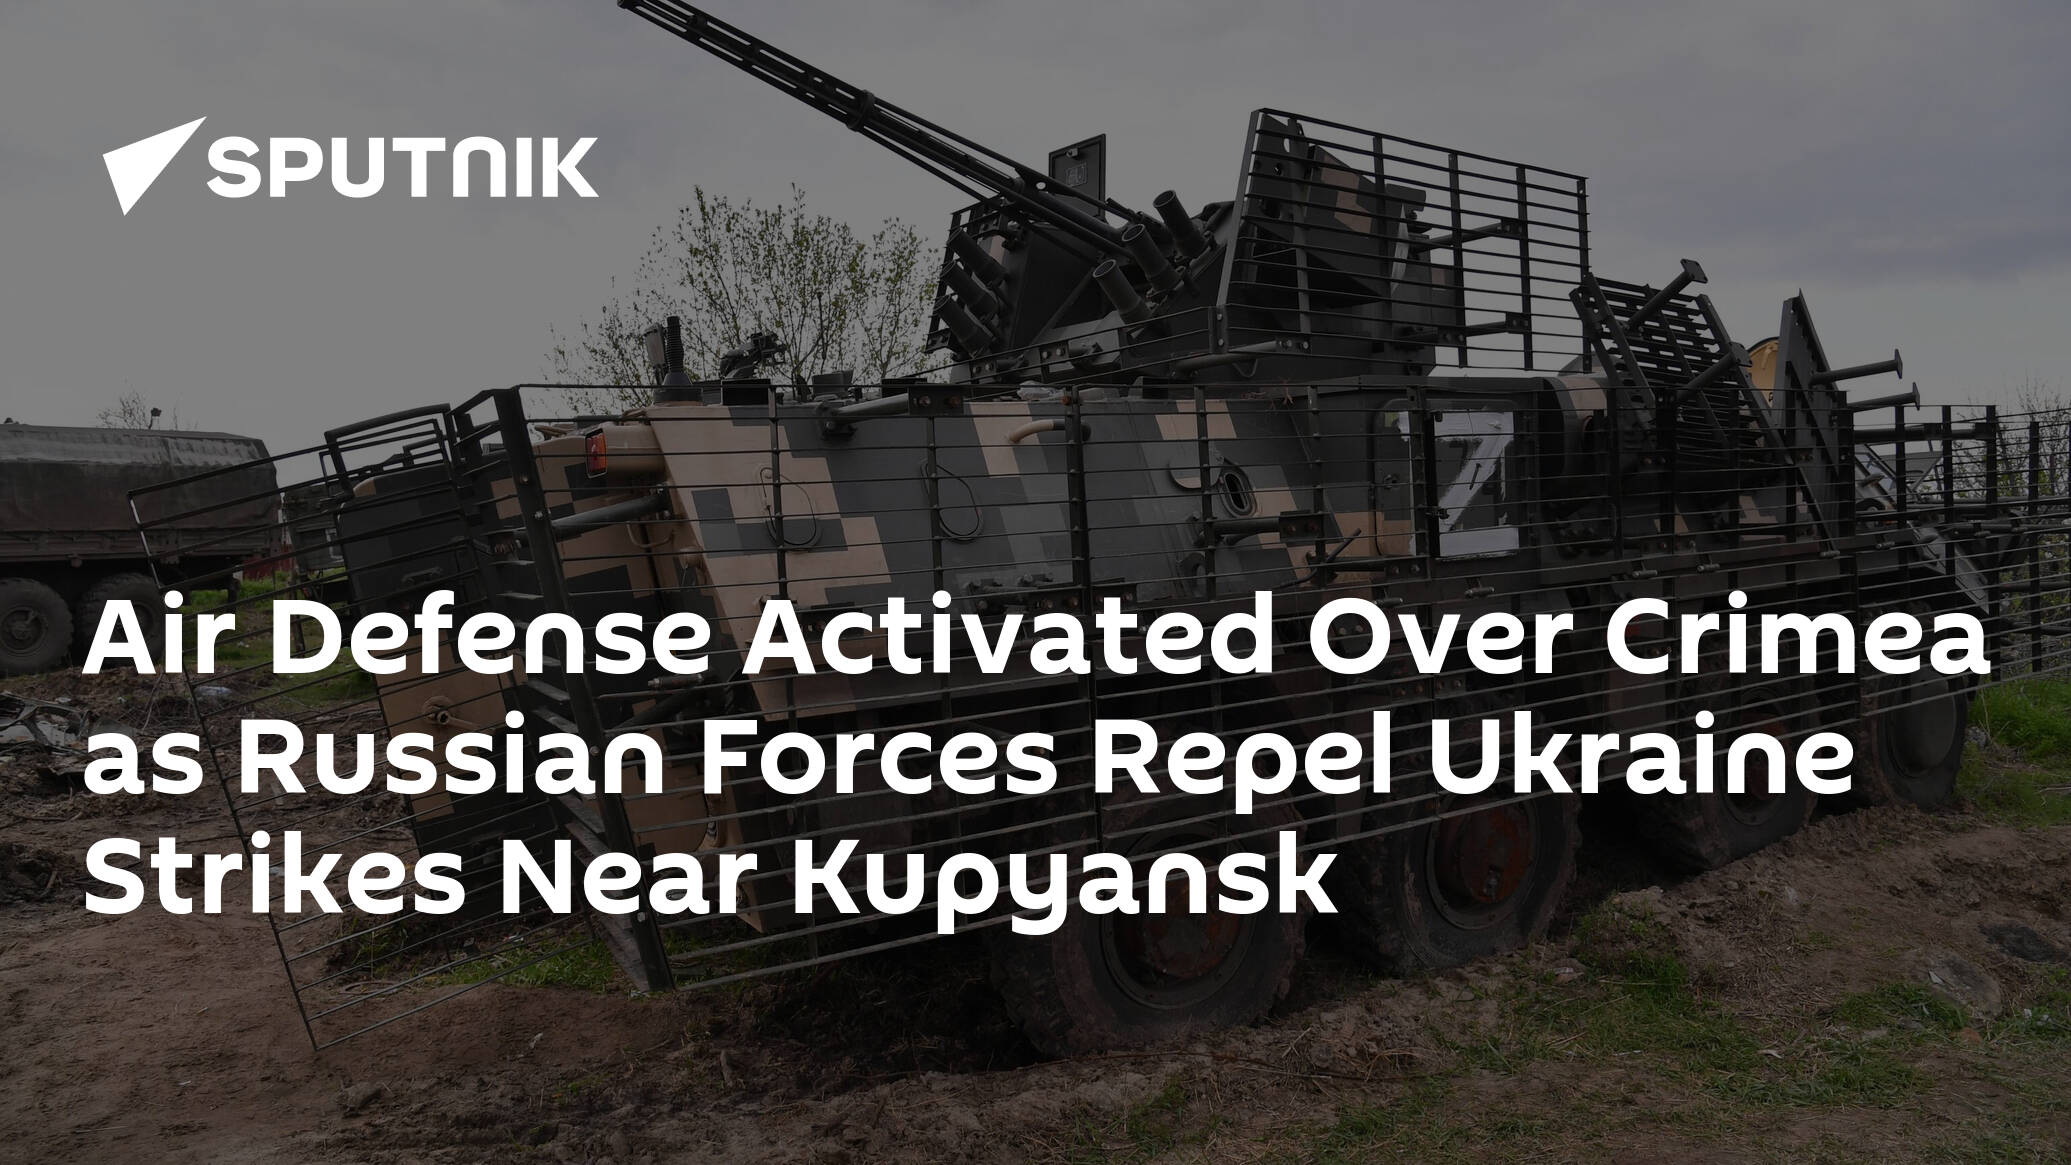 Air Defense Activated Over Crimea as Russian Forces Repel Ukraine Strikes Near Kupyansk